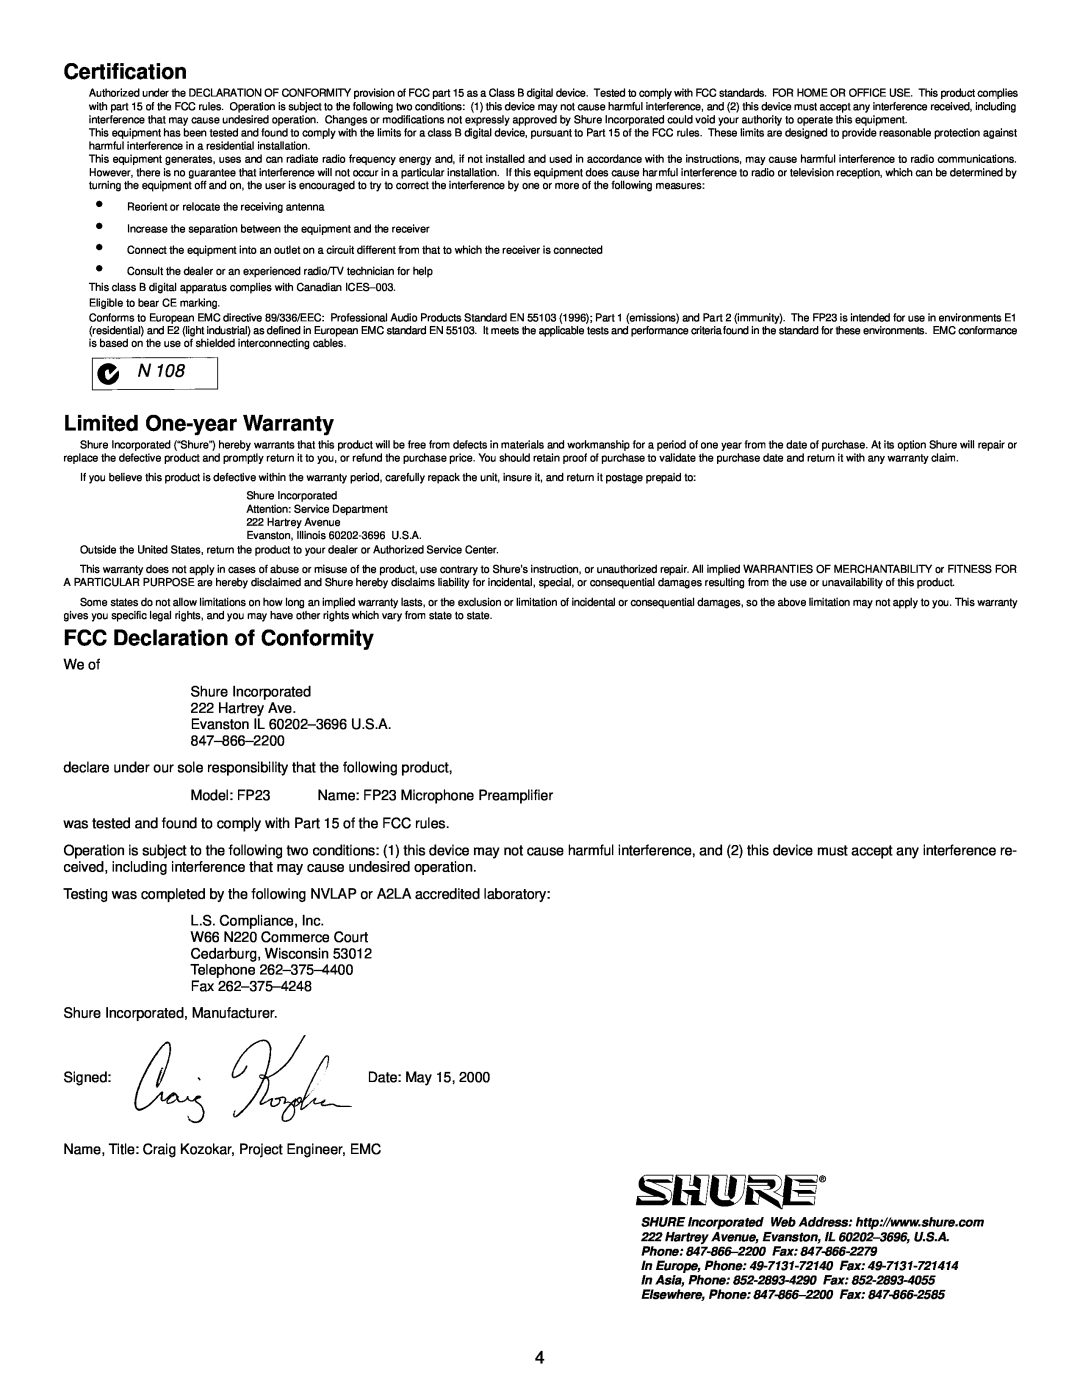 Shure FP23 specifications Certification, Limited One-yearWarranty, FCC Declaration of Conformity 